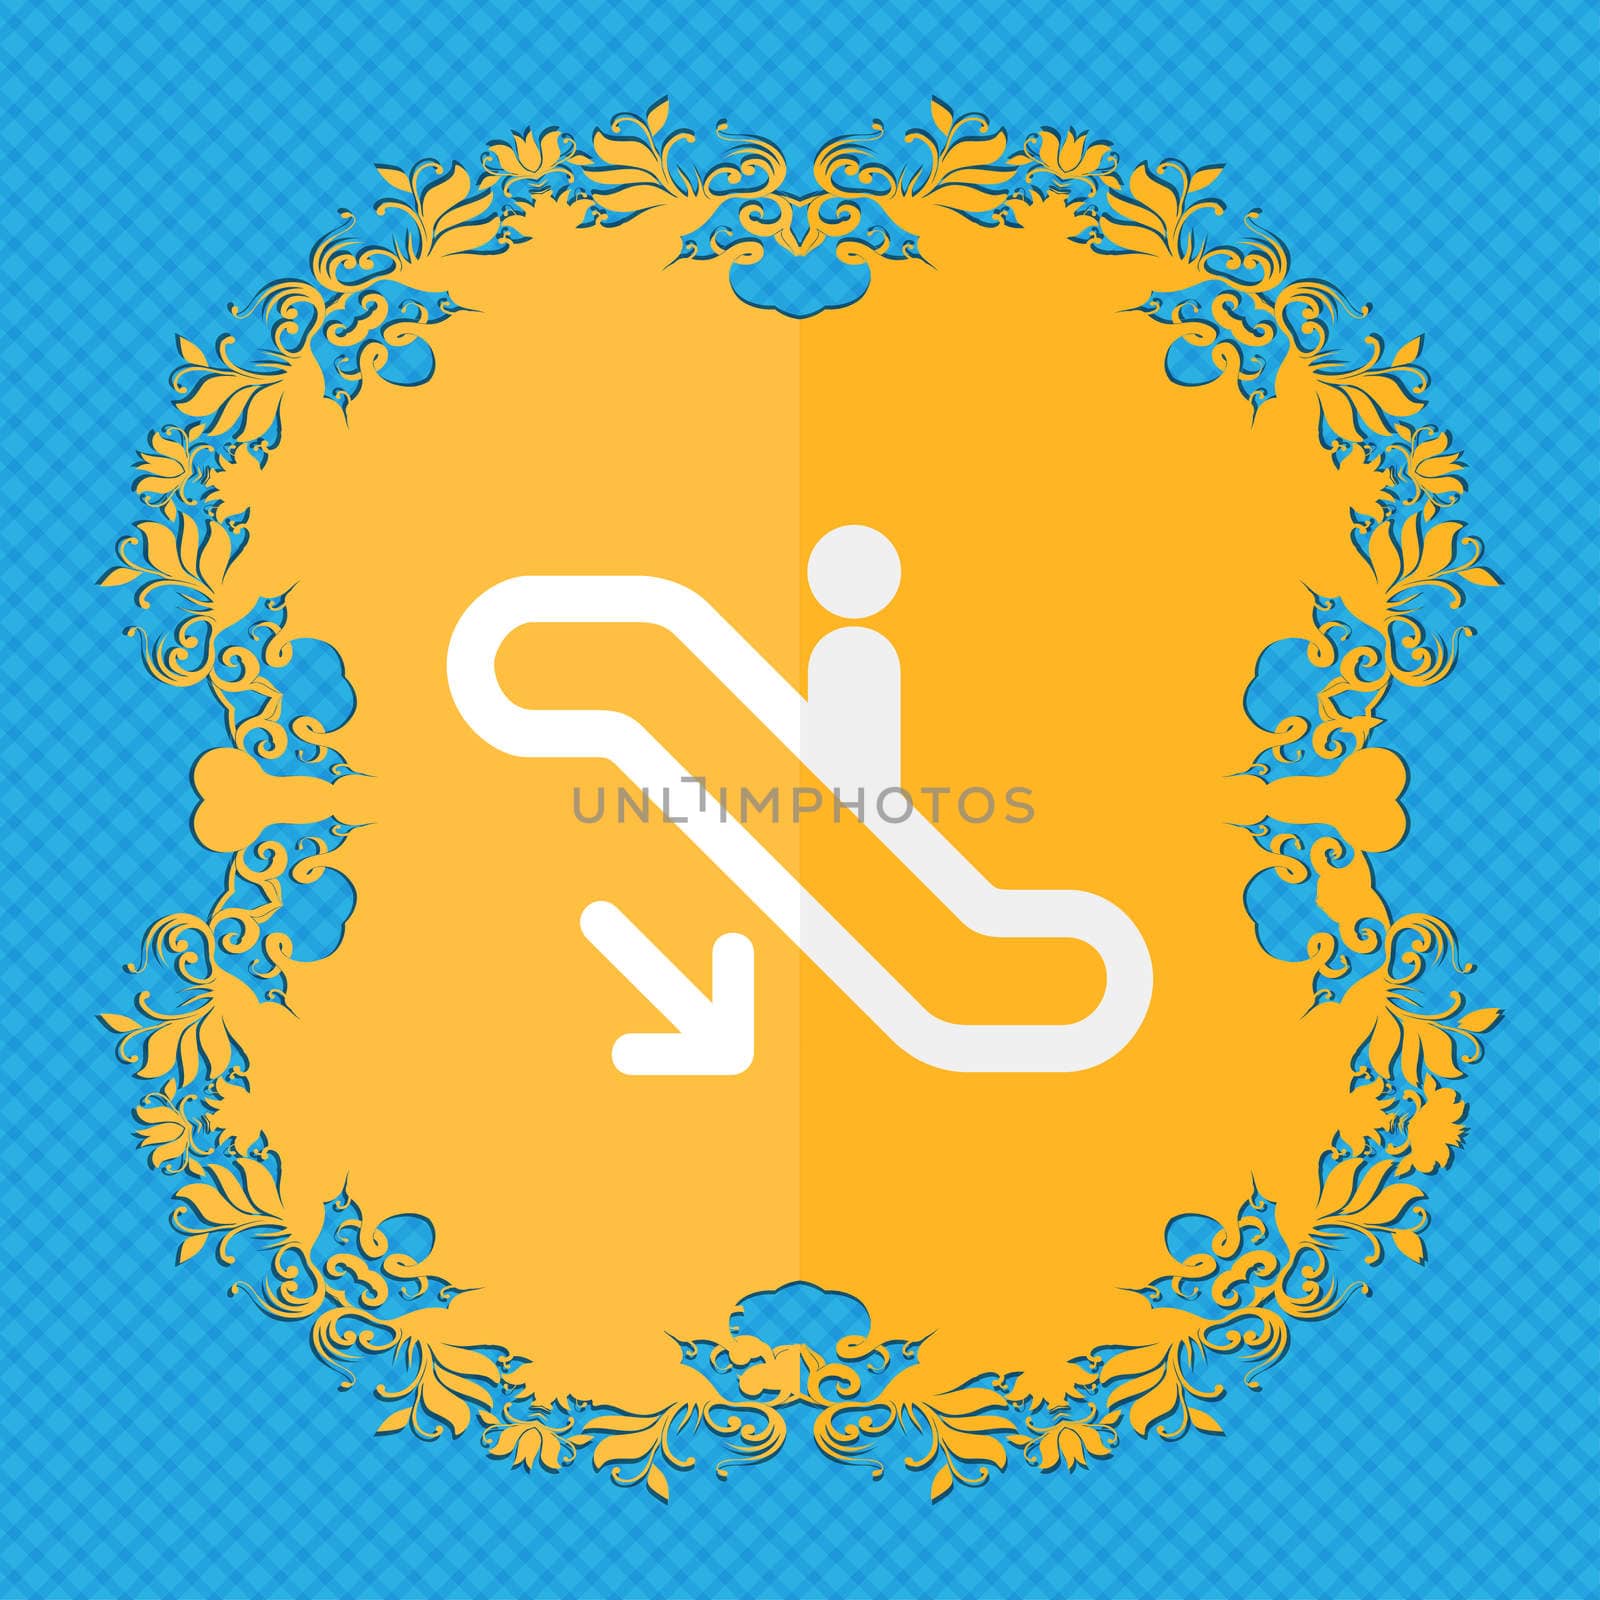 elevator, Escalator, Staircase. Floral flat design on a blue abstract background with place for your text.  by serhii_lohvyniuk